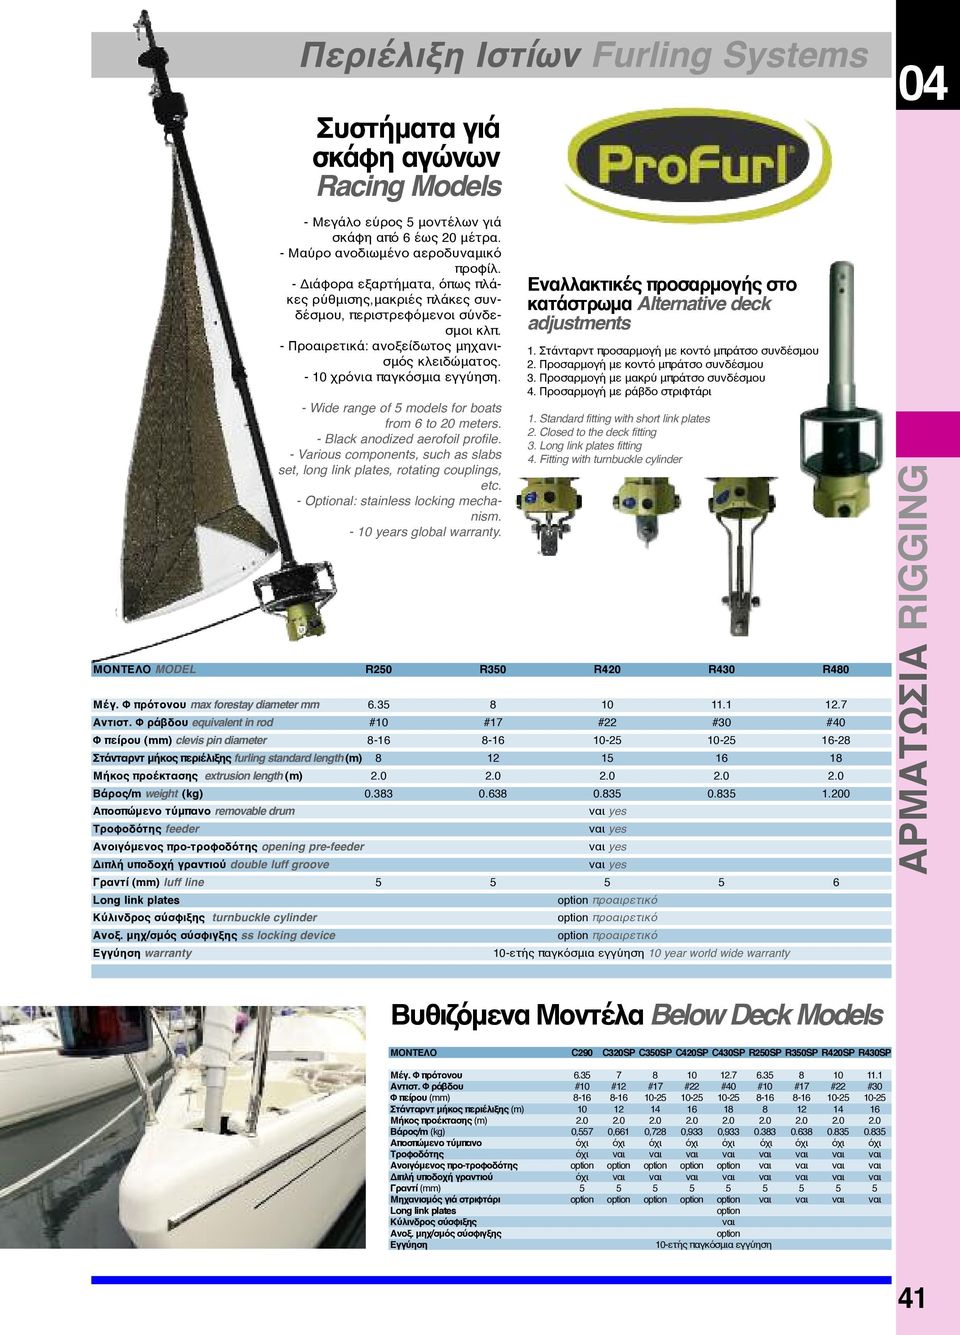 - Wide range of 5 models for boats from 6 to 20 meters. - Black anodized aerofoil profile. - Various components, such as slabs set, long link plates, rotating couplings, etc.